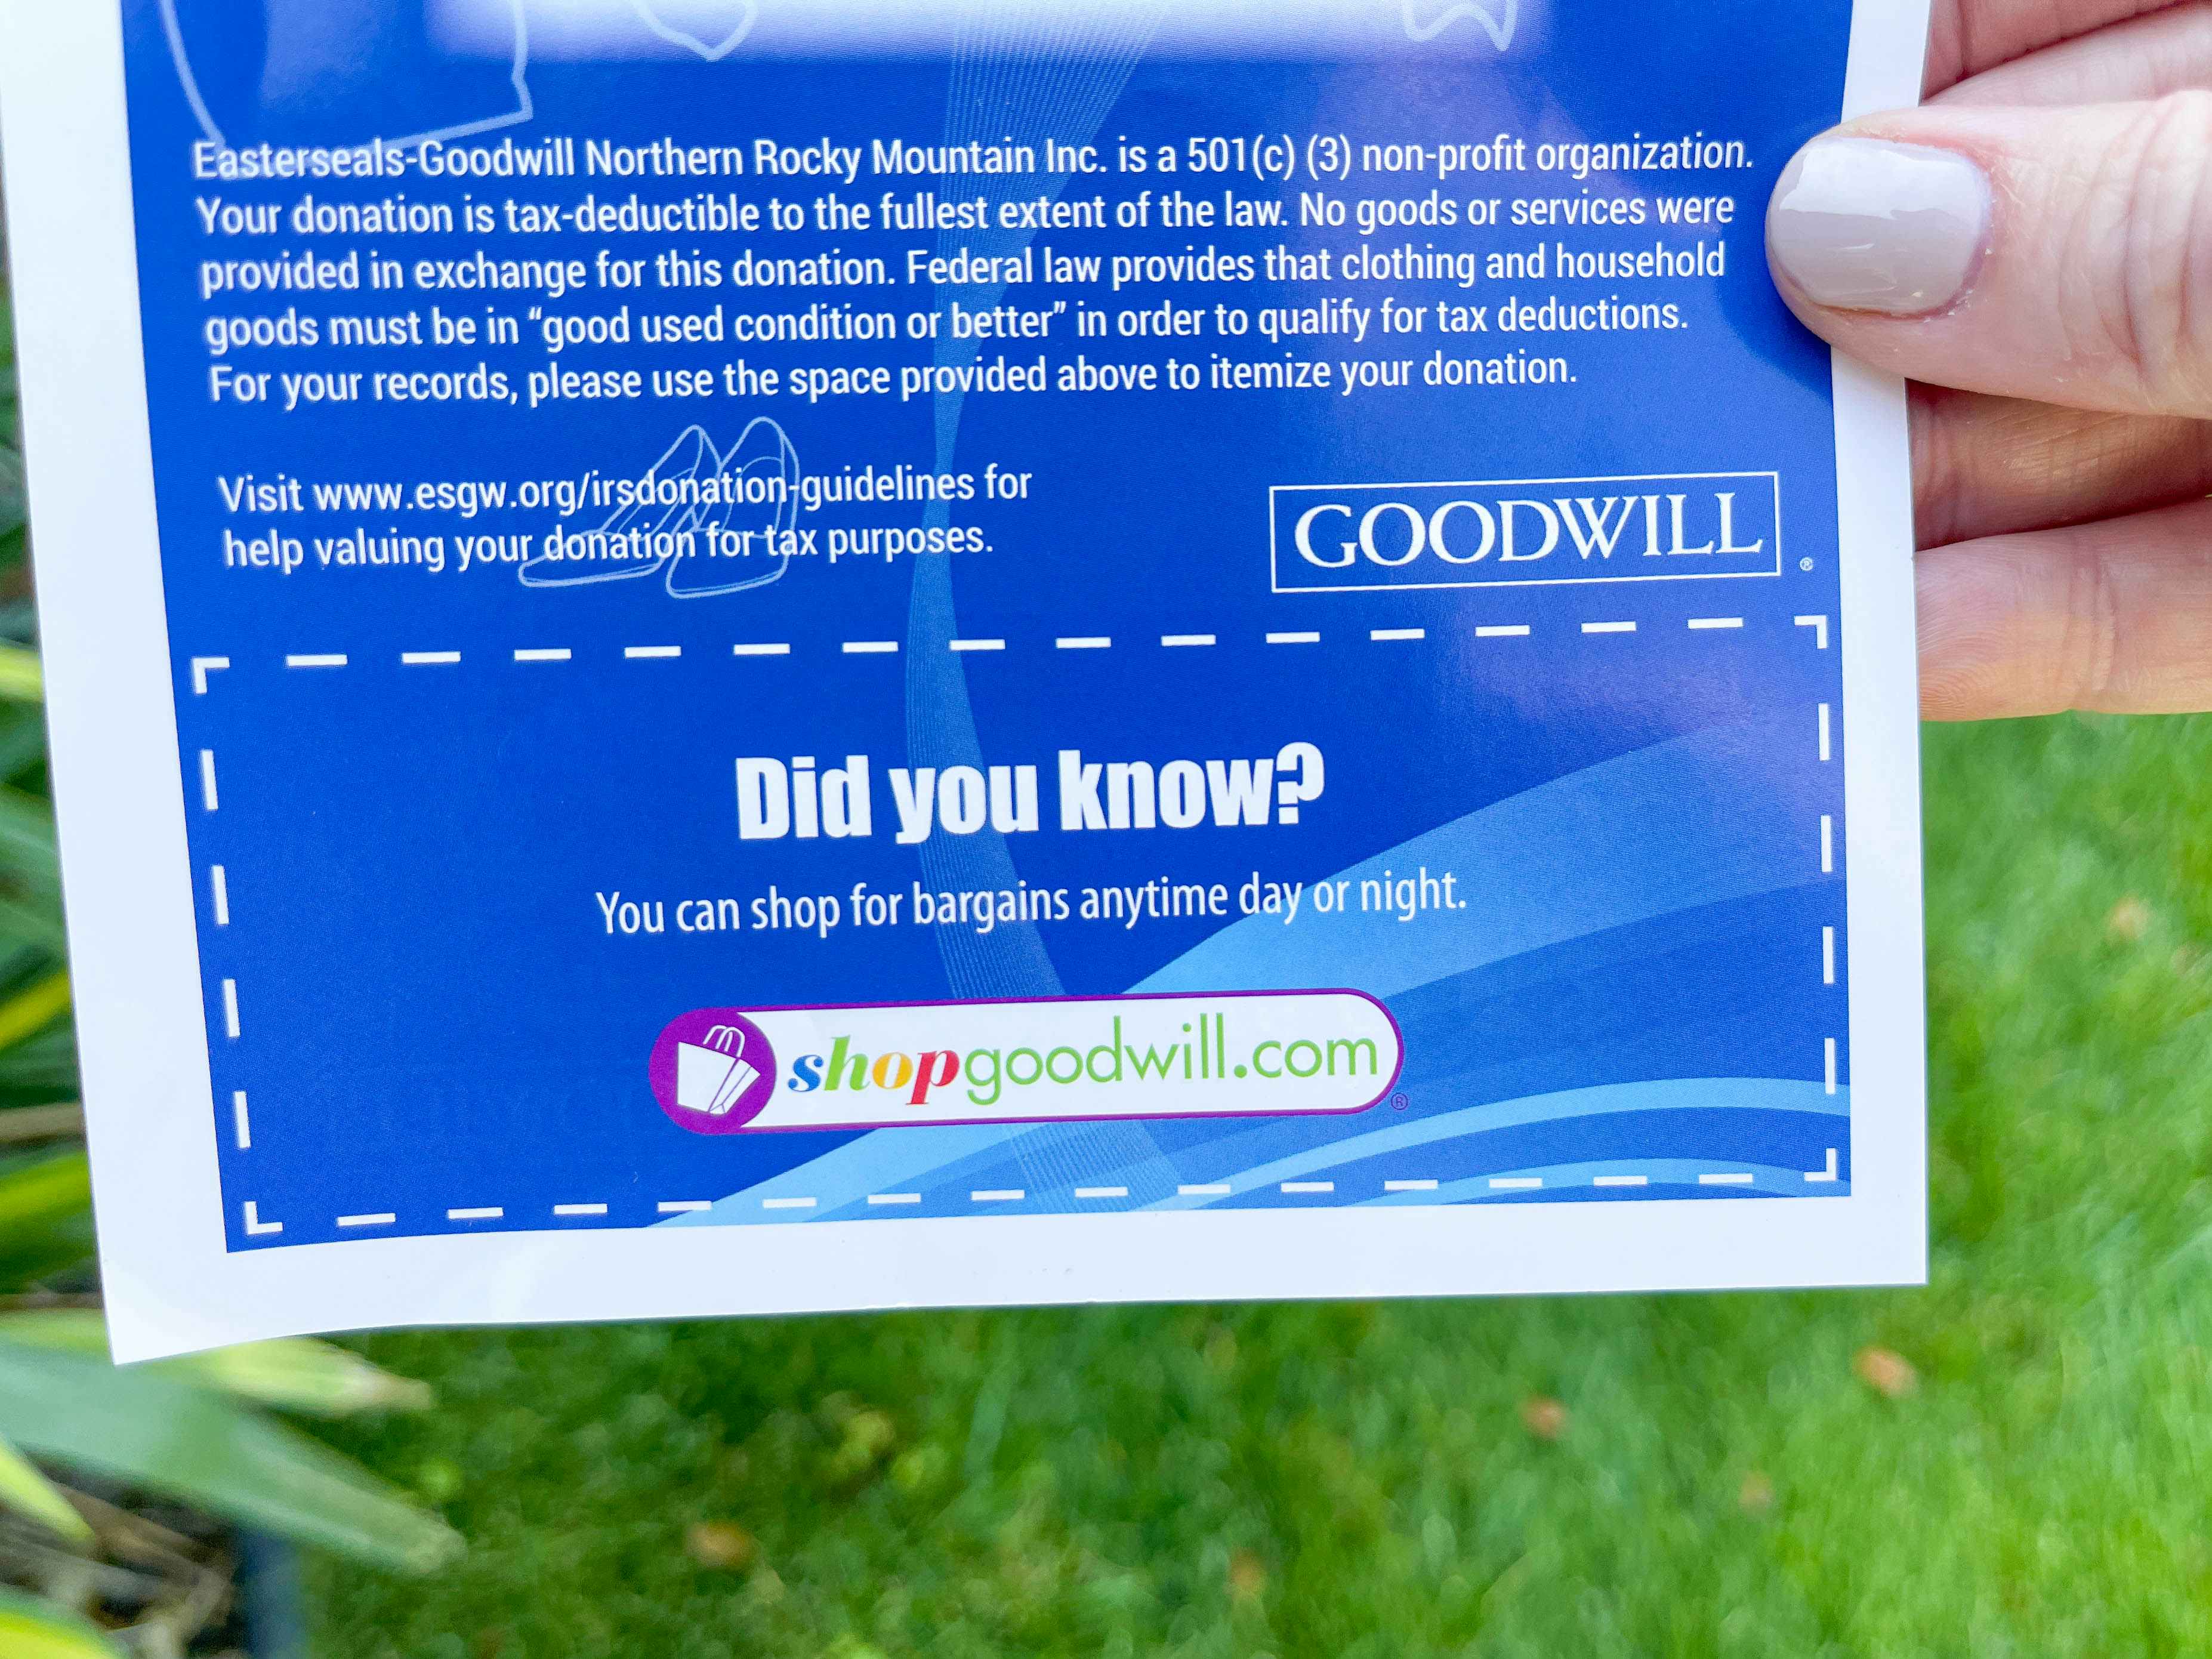 goodwill donation tax coupon with shop goodwill.com info 